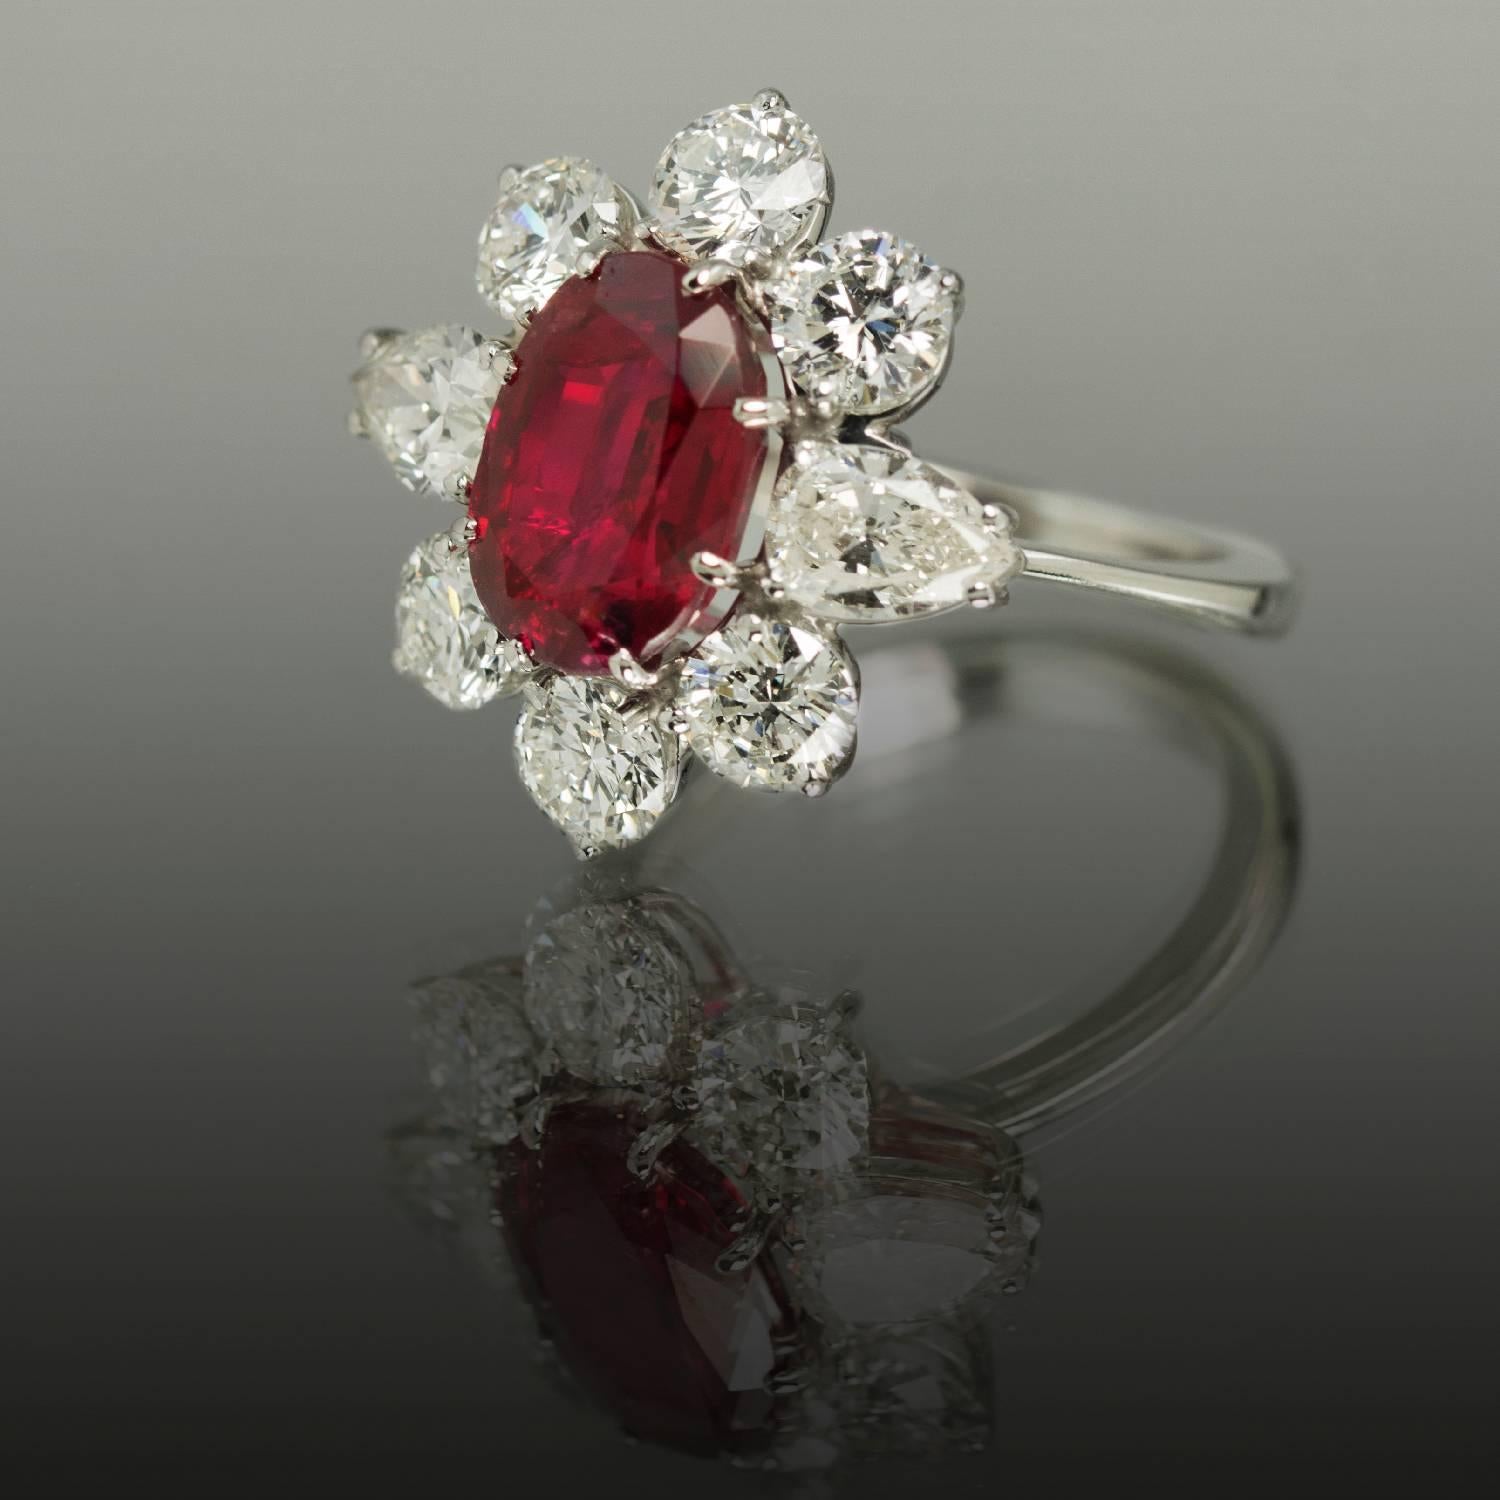 Platinum Ring with 5.19 Carat Gubelin certified No Heat Burma Ruby and 2 pear shape diamonds weighing 1.15 carat and 6 round brilliant diamonds weighing 2.77 carats. Ring is size 6 1/2, but can be sized.

Note: The stone certified by Gubelin in a